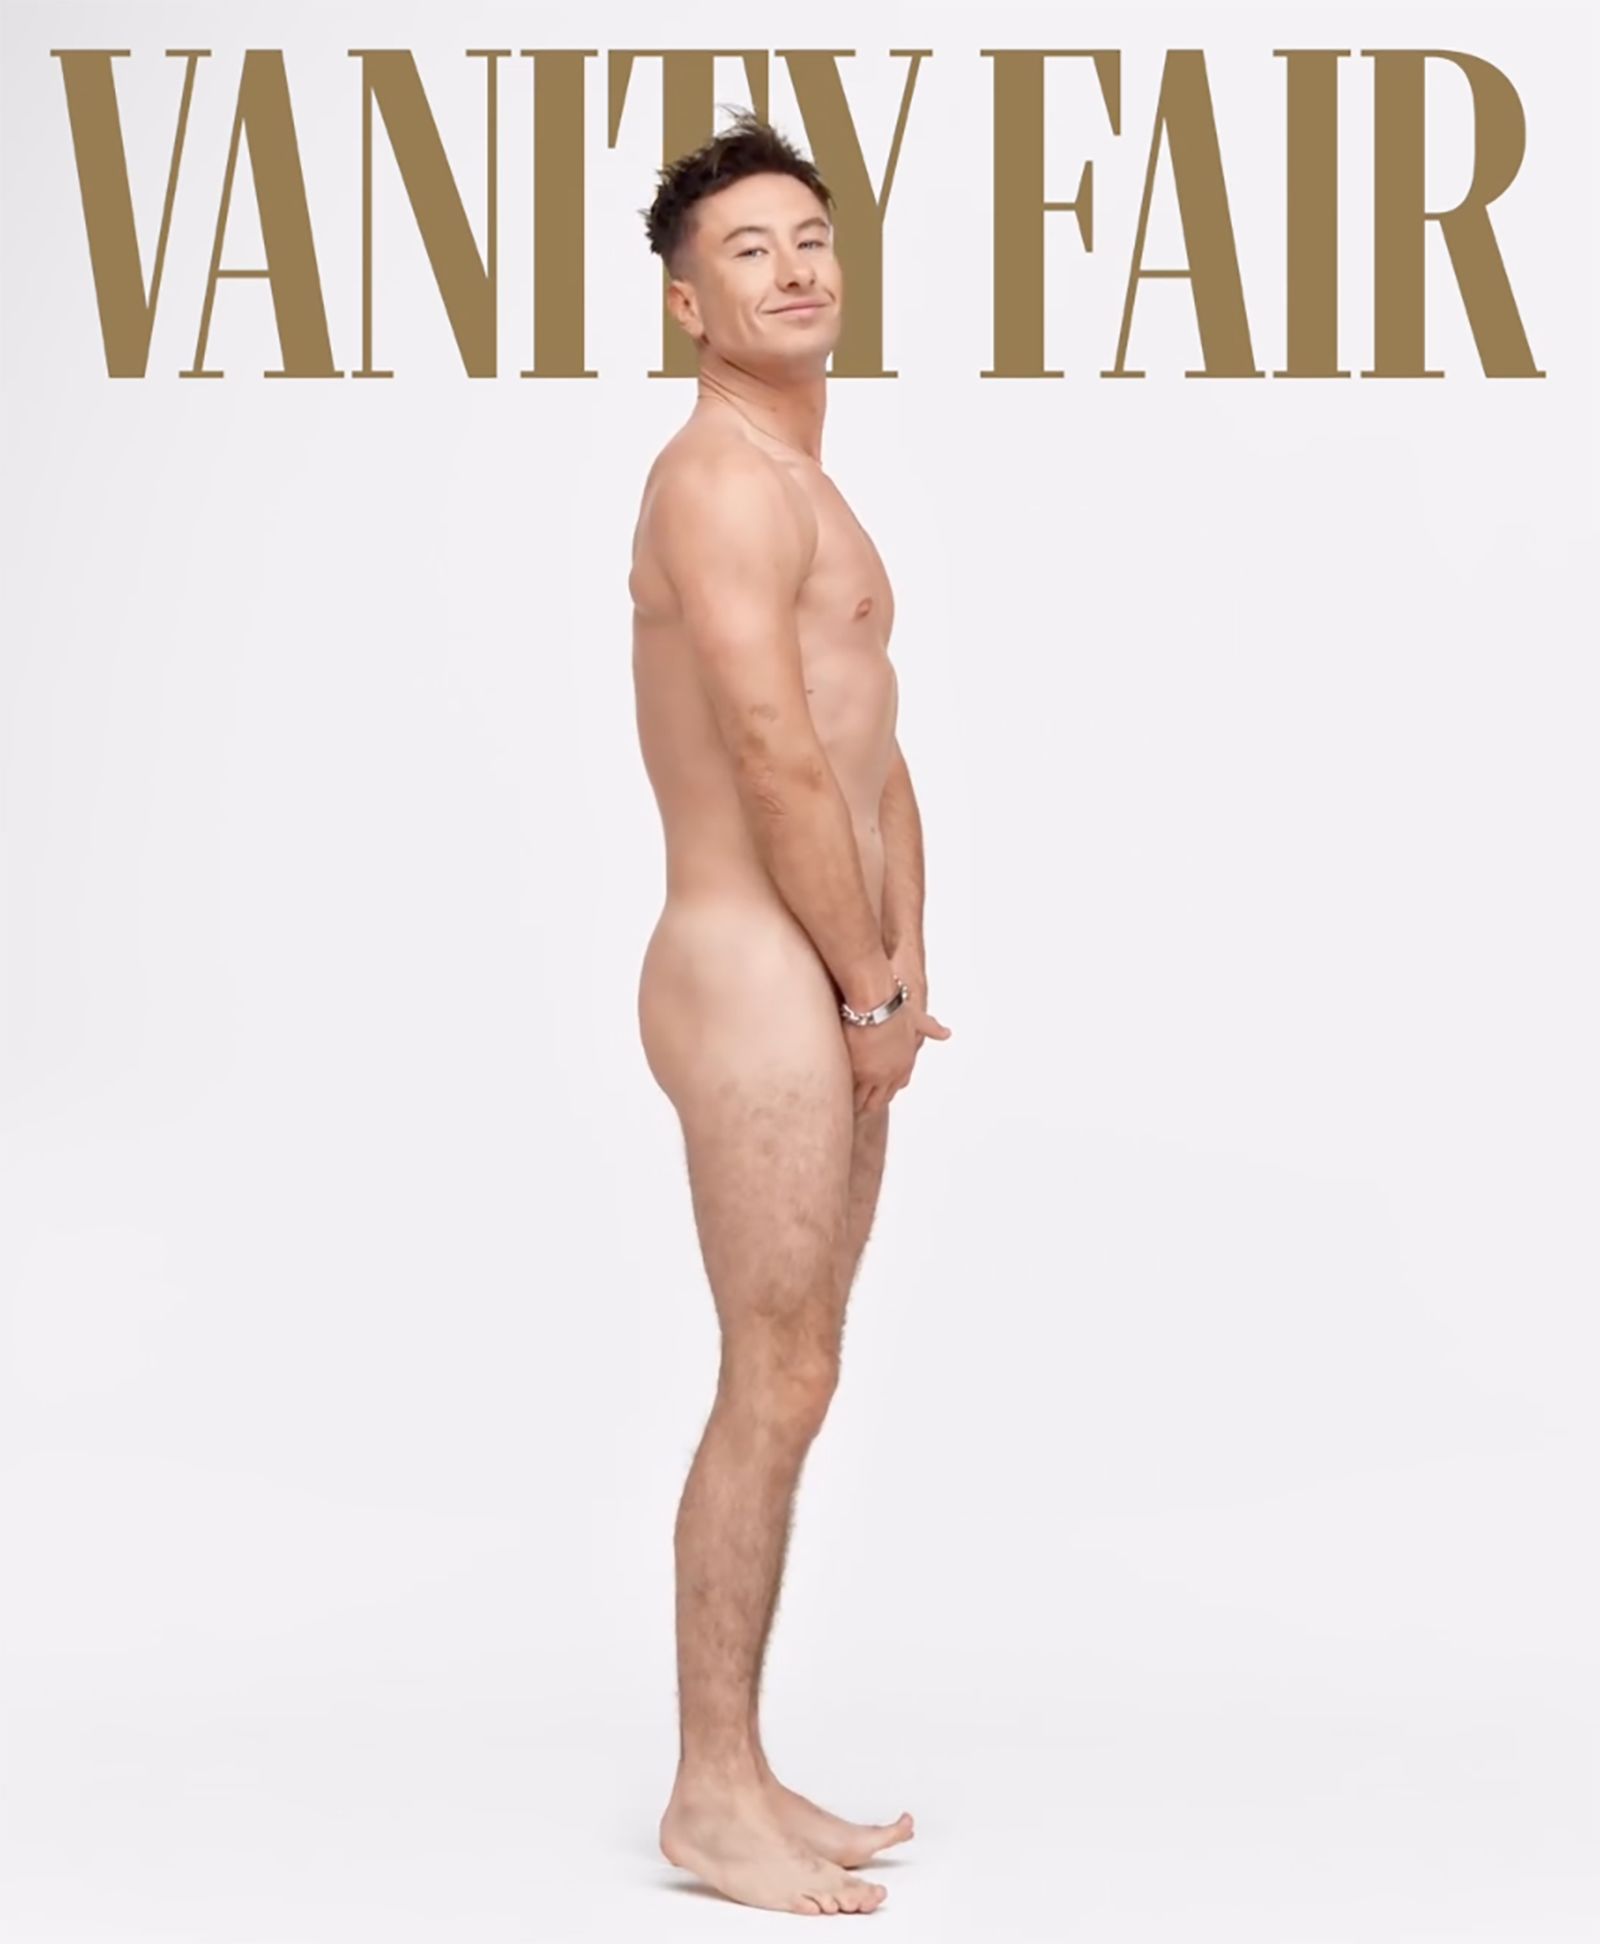 Barry Keoghan divided the internet when he posed naked for Vanity Fair on Wednesday in a nod to his latest film, 